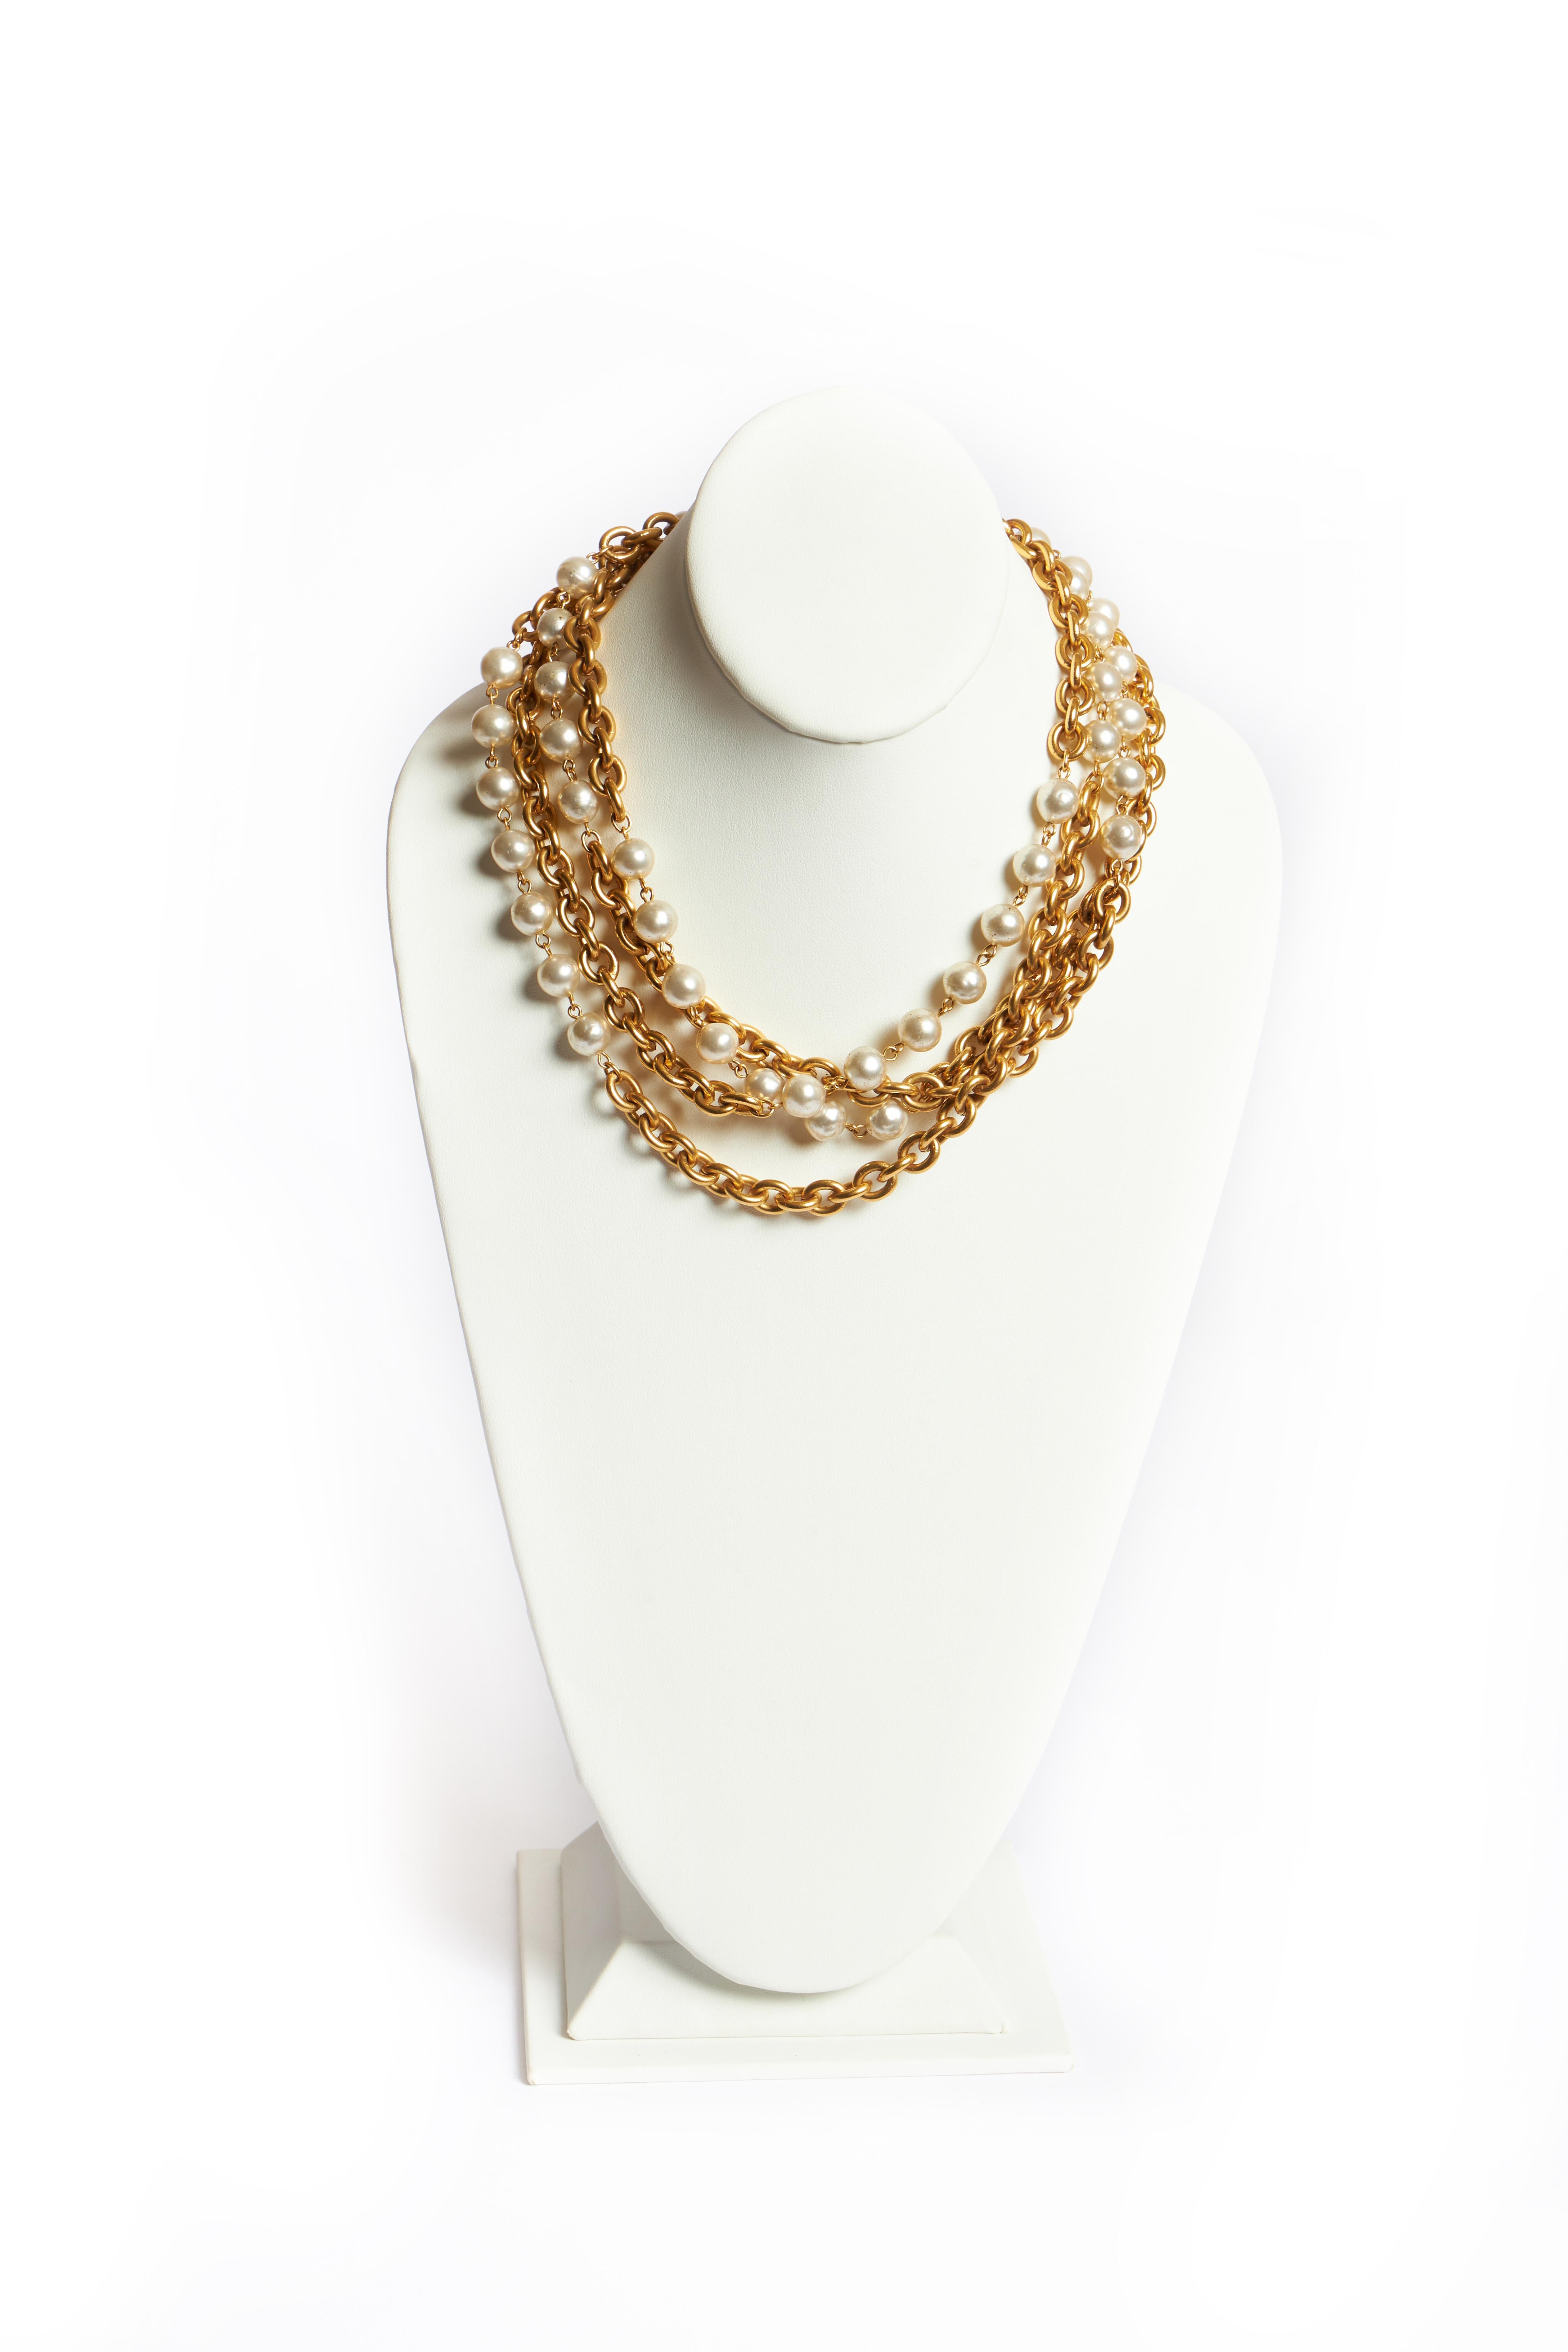 Chanel gold tone metal double-strand necklace accented with pearl glass beads. Can be worn single or double. Comes with original duster or box.